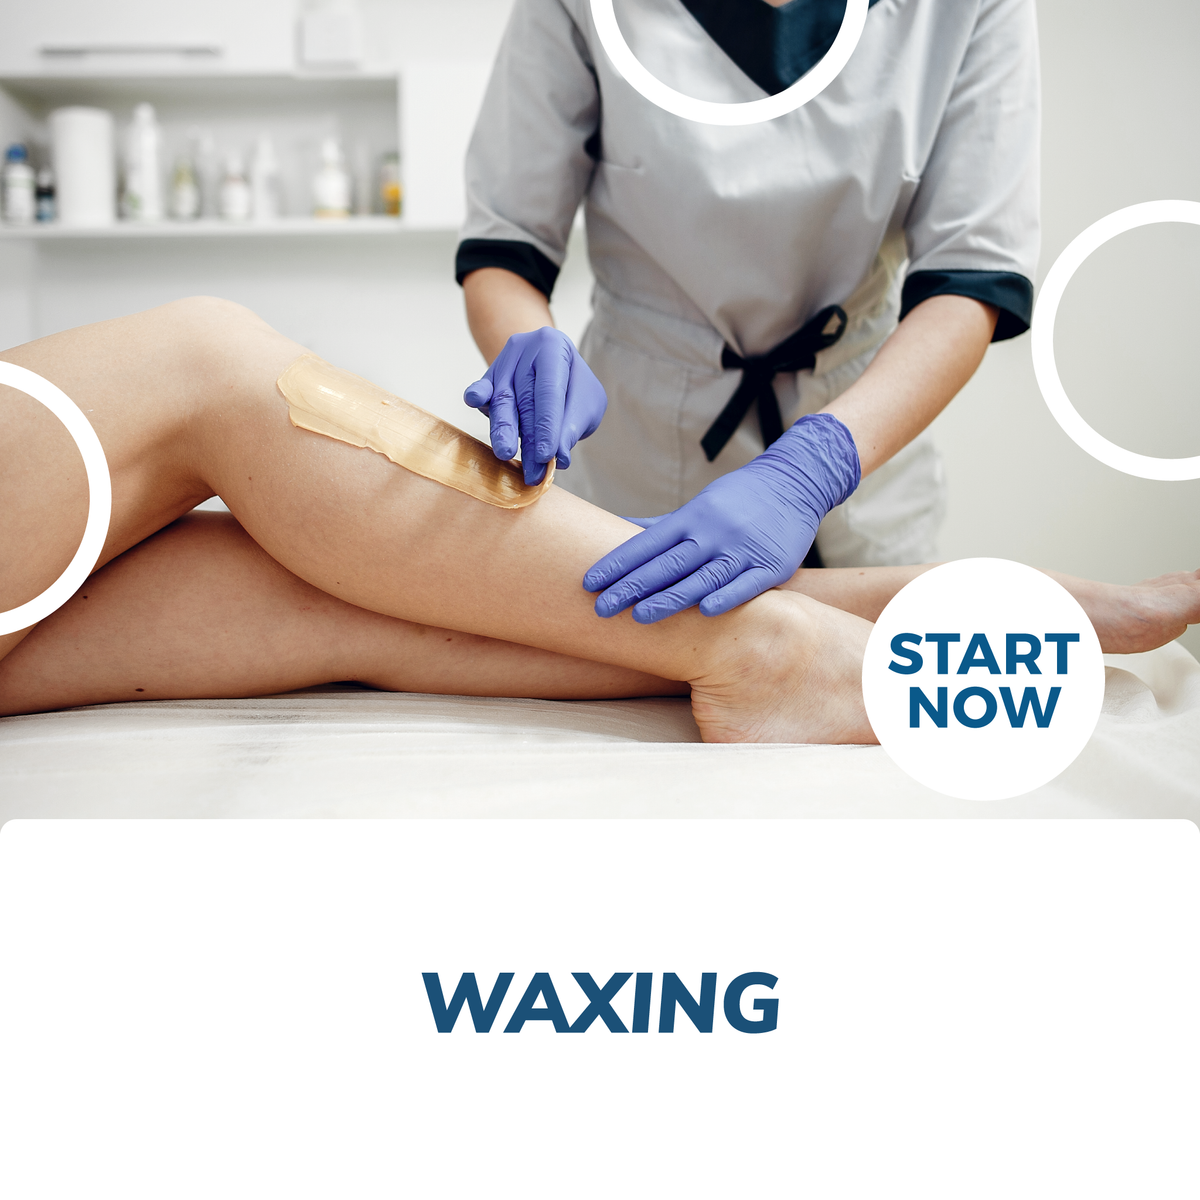 Waxing Certification Course Online Courses For Success